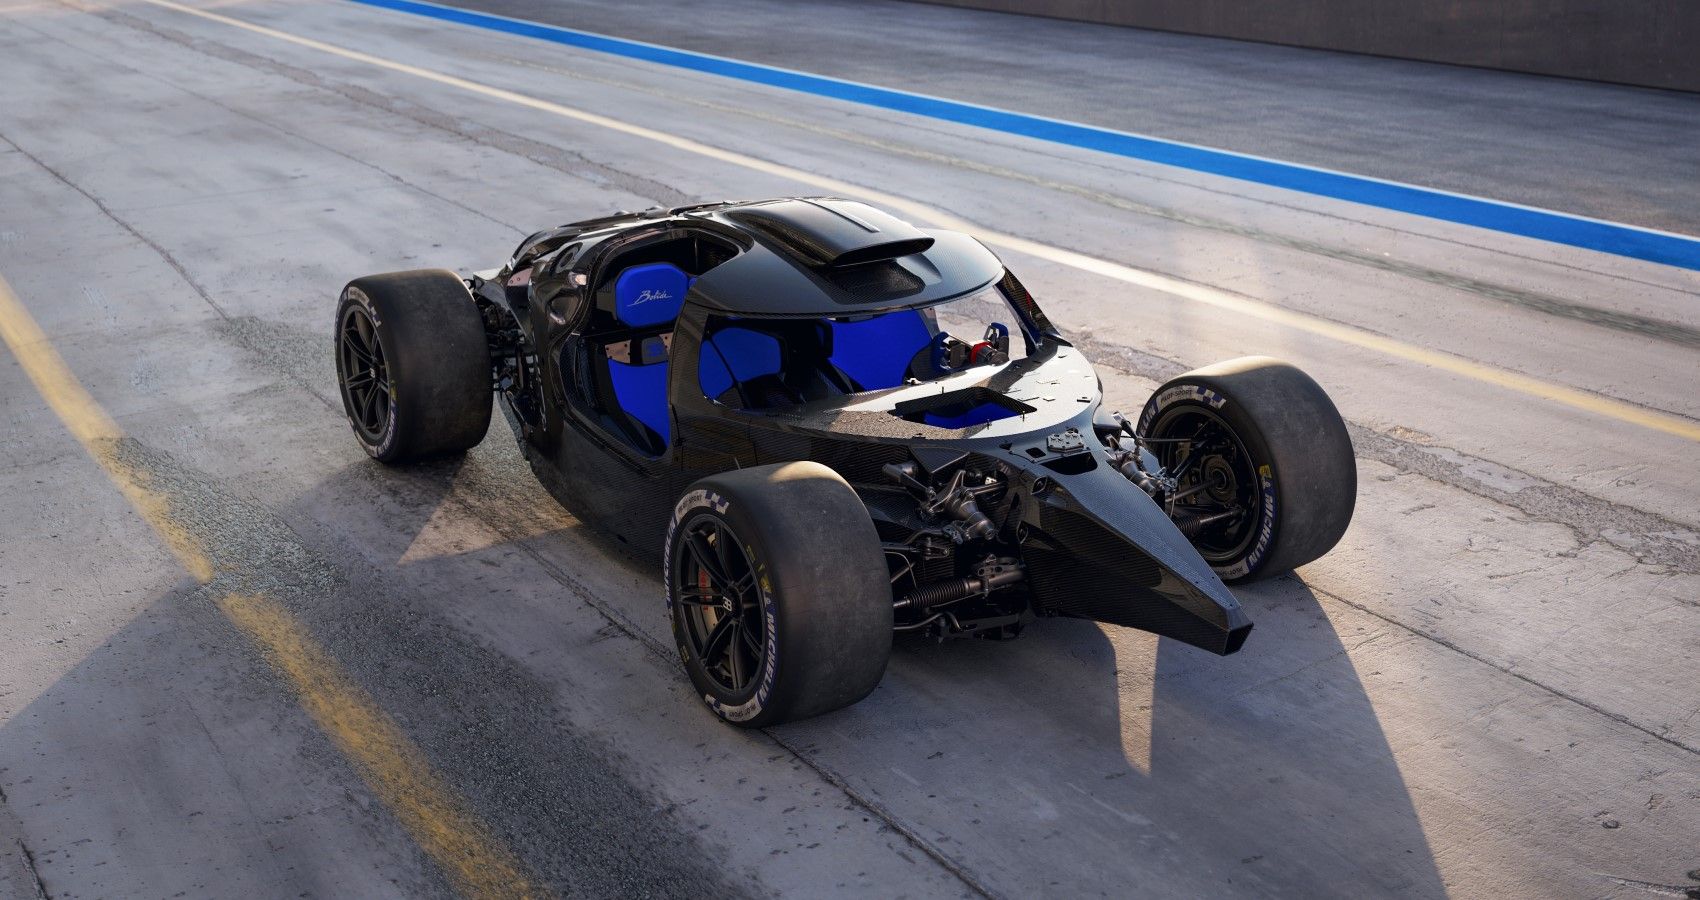 Bugatti Bolide rolling chassis, front quarter view